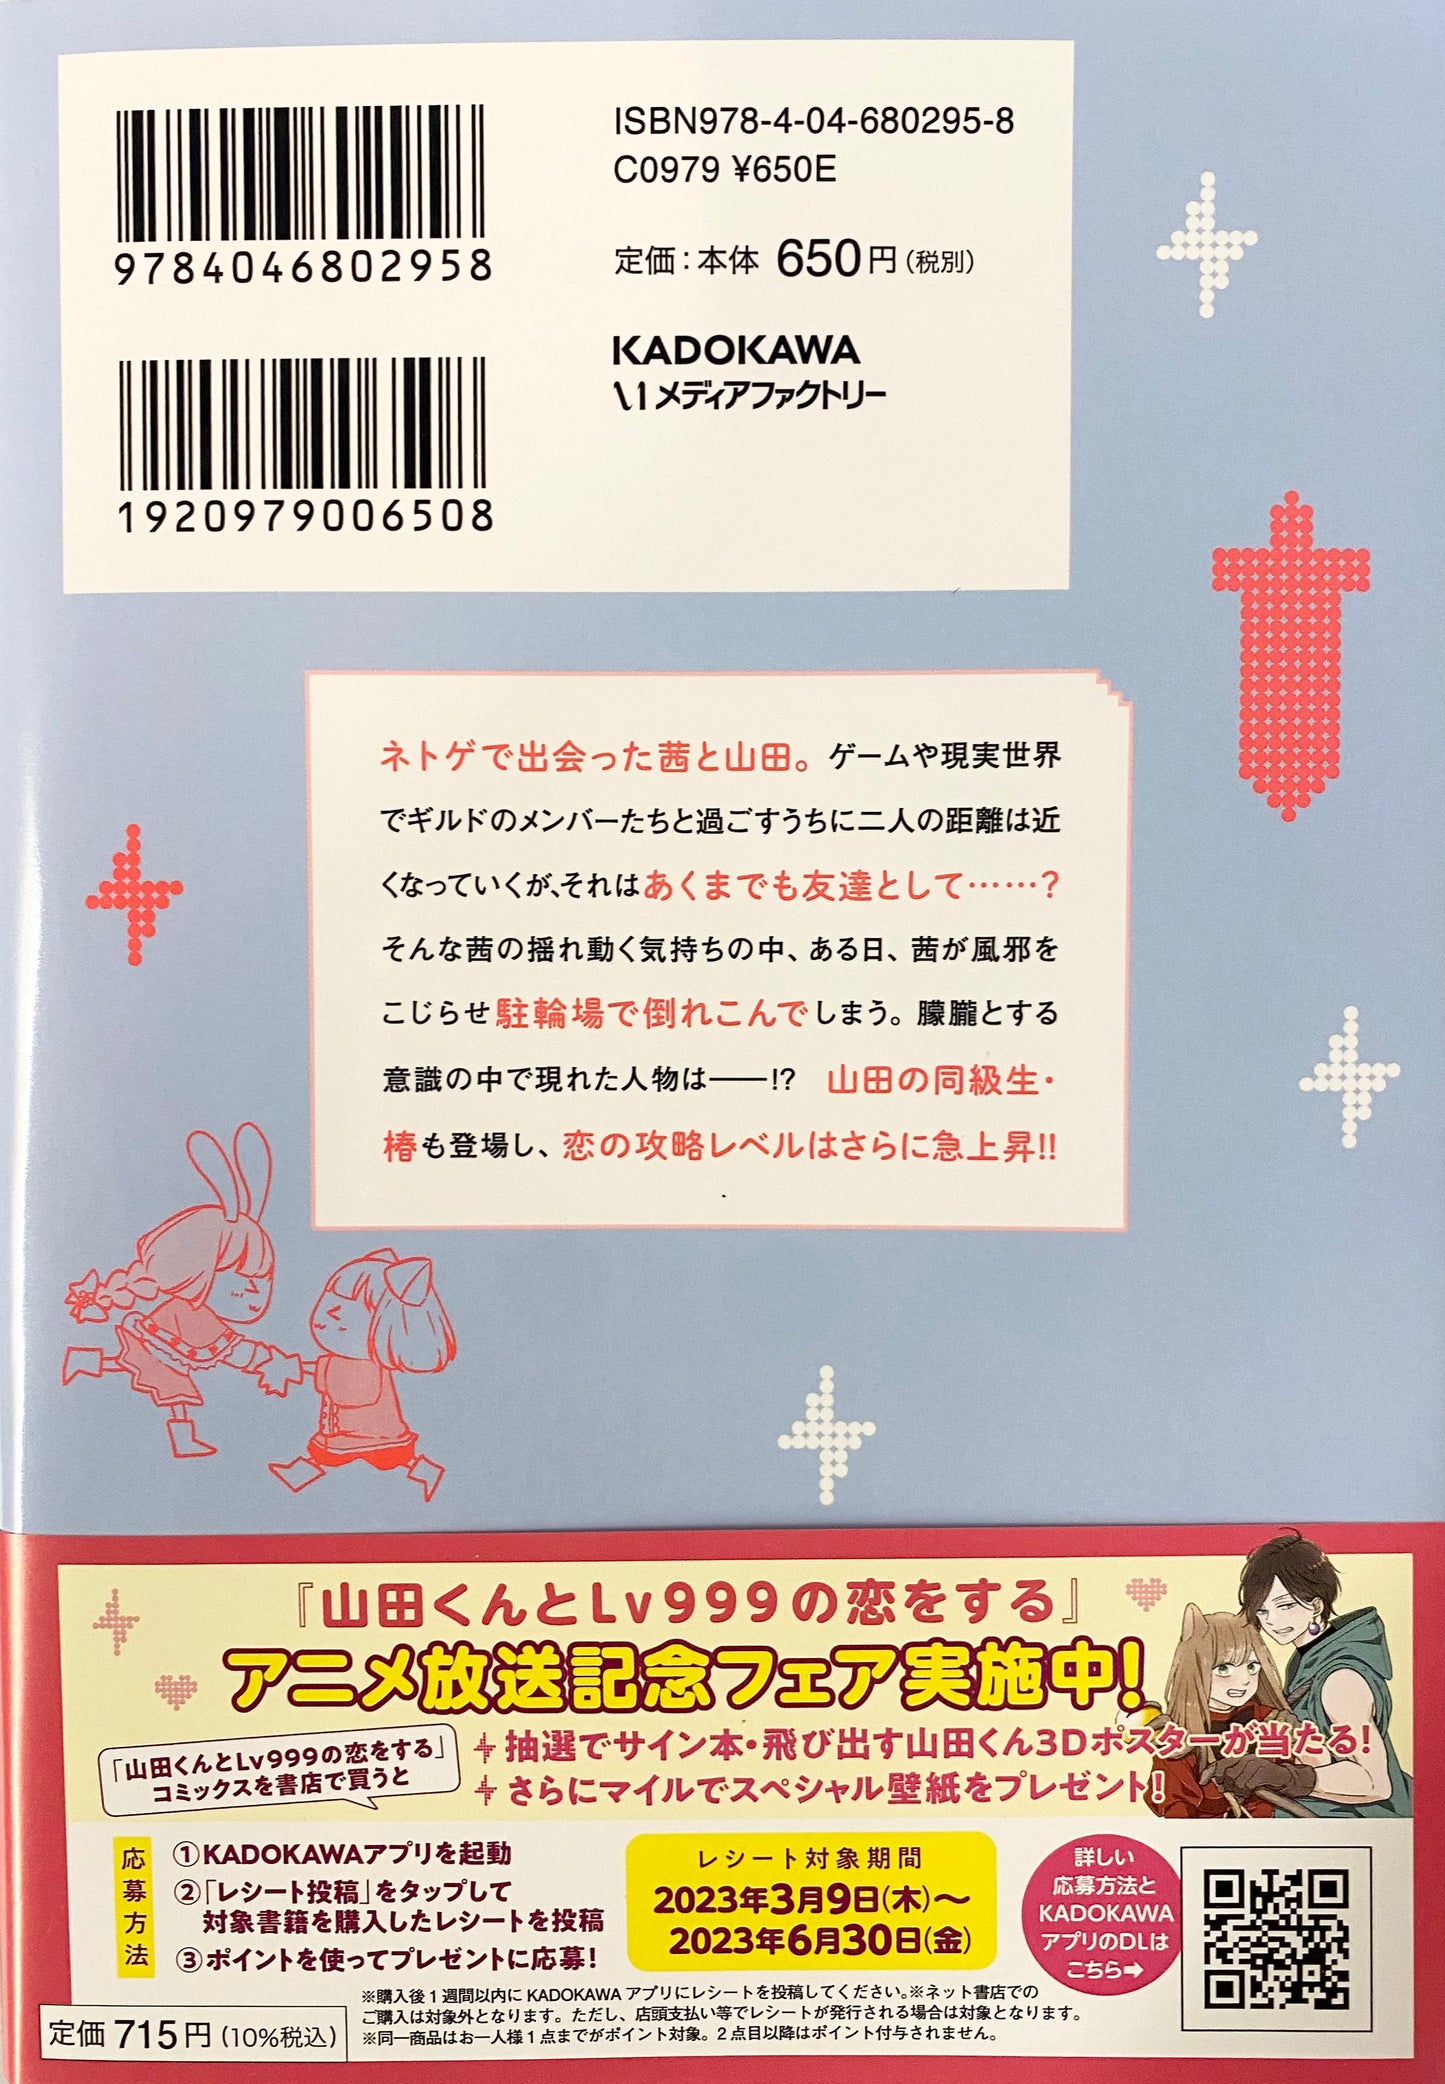 My Love Story with Yamada-kun at Lv999 Vol.3_NEW-Official Japanese Edition